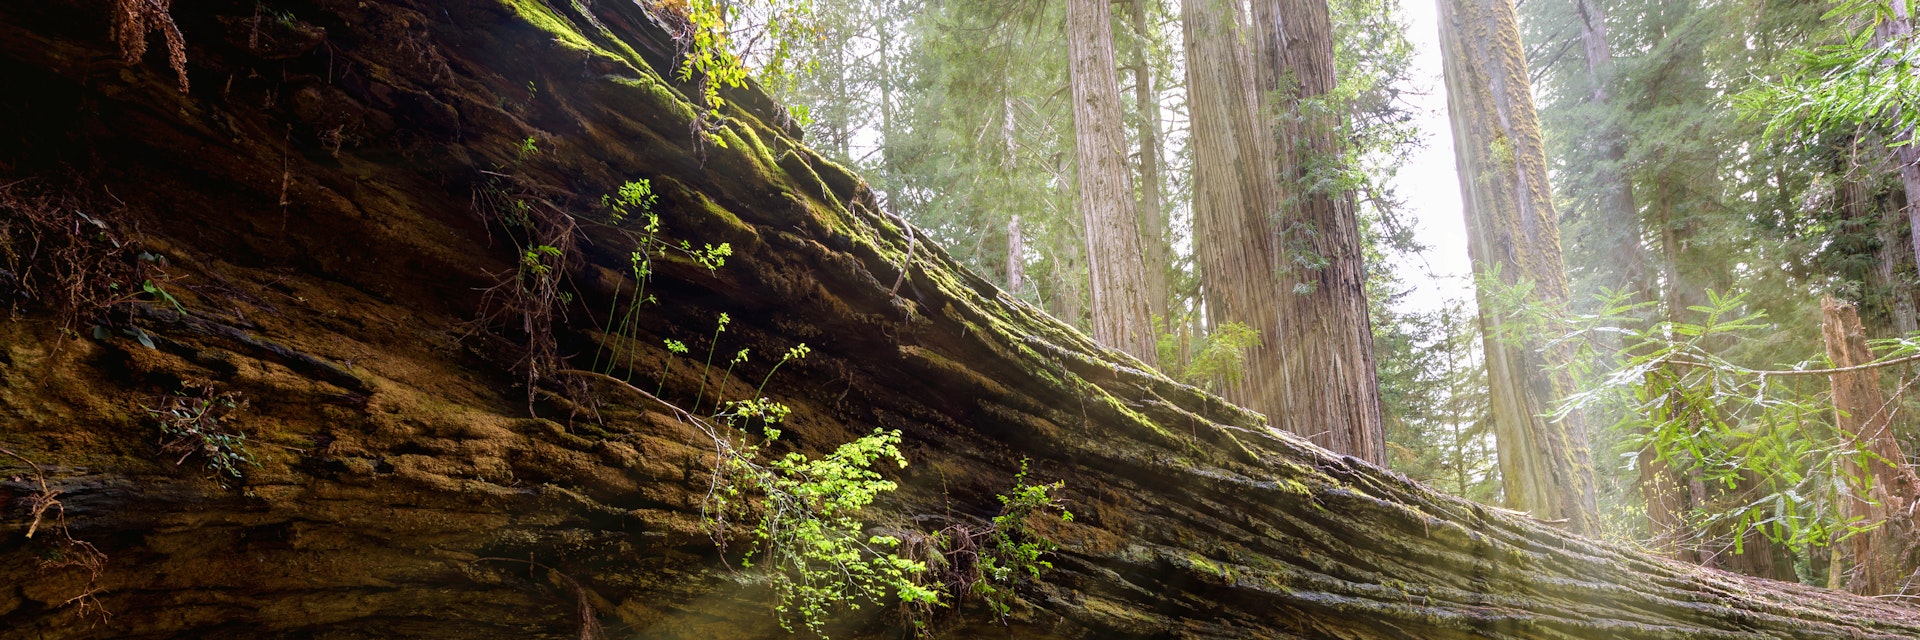 A couple of tourists walking under a fallen redwood in Redwood National Park.